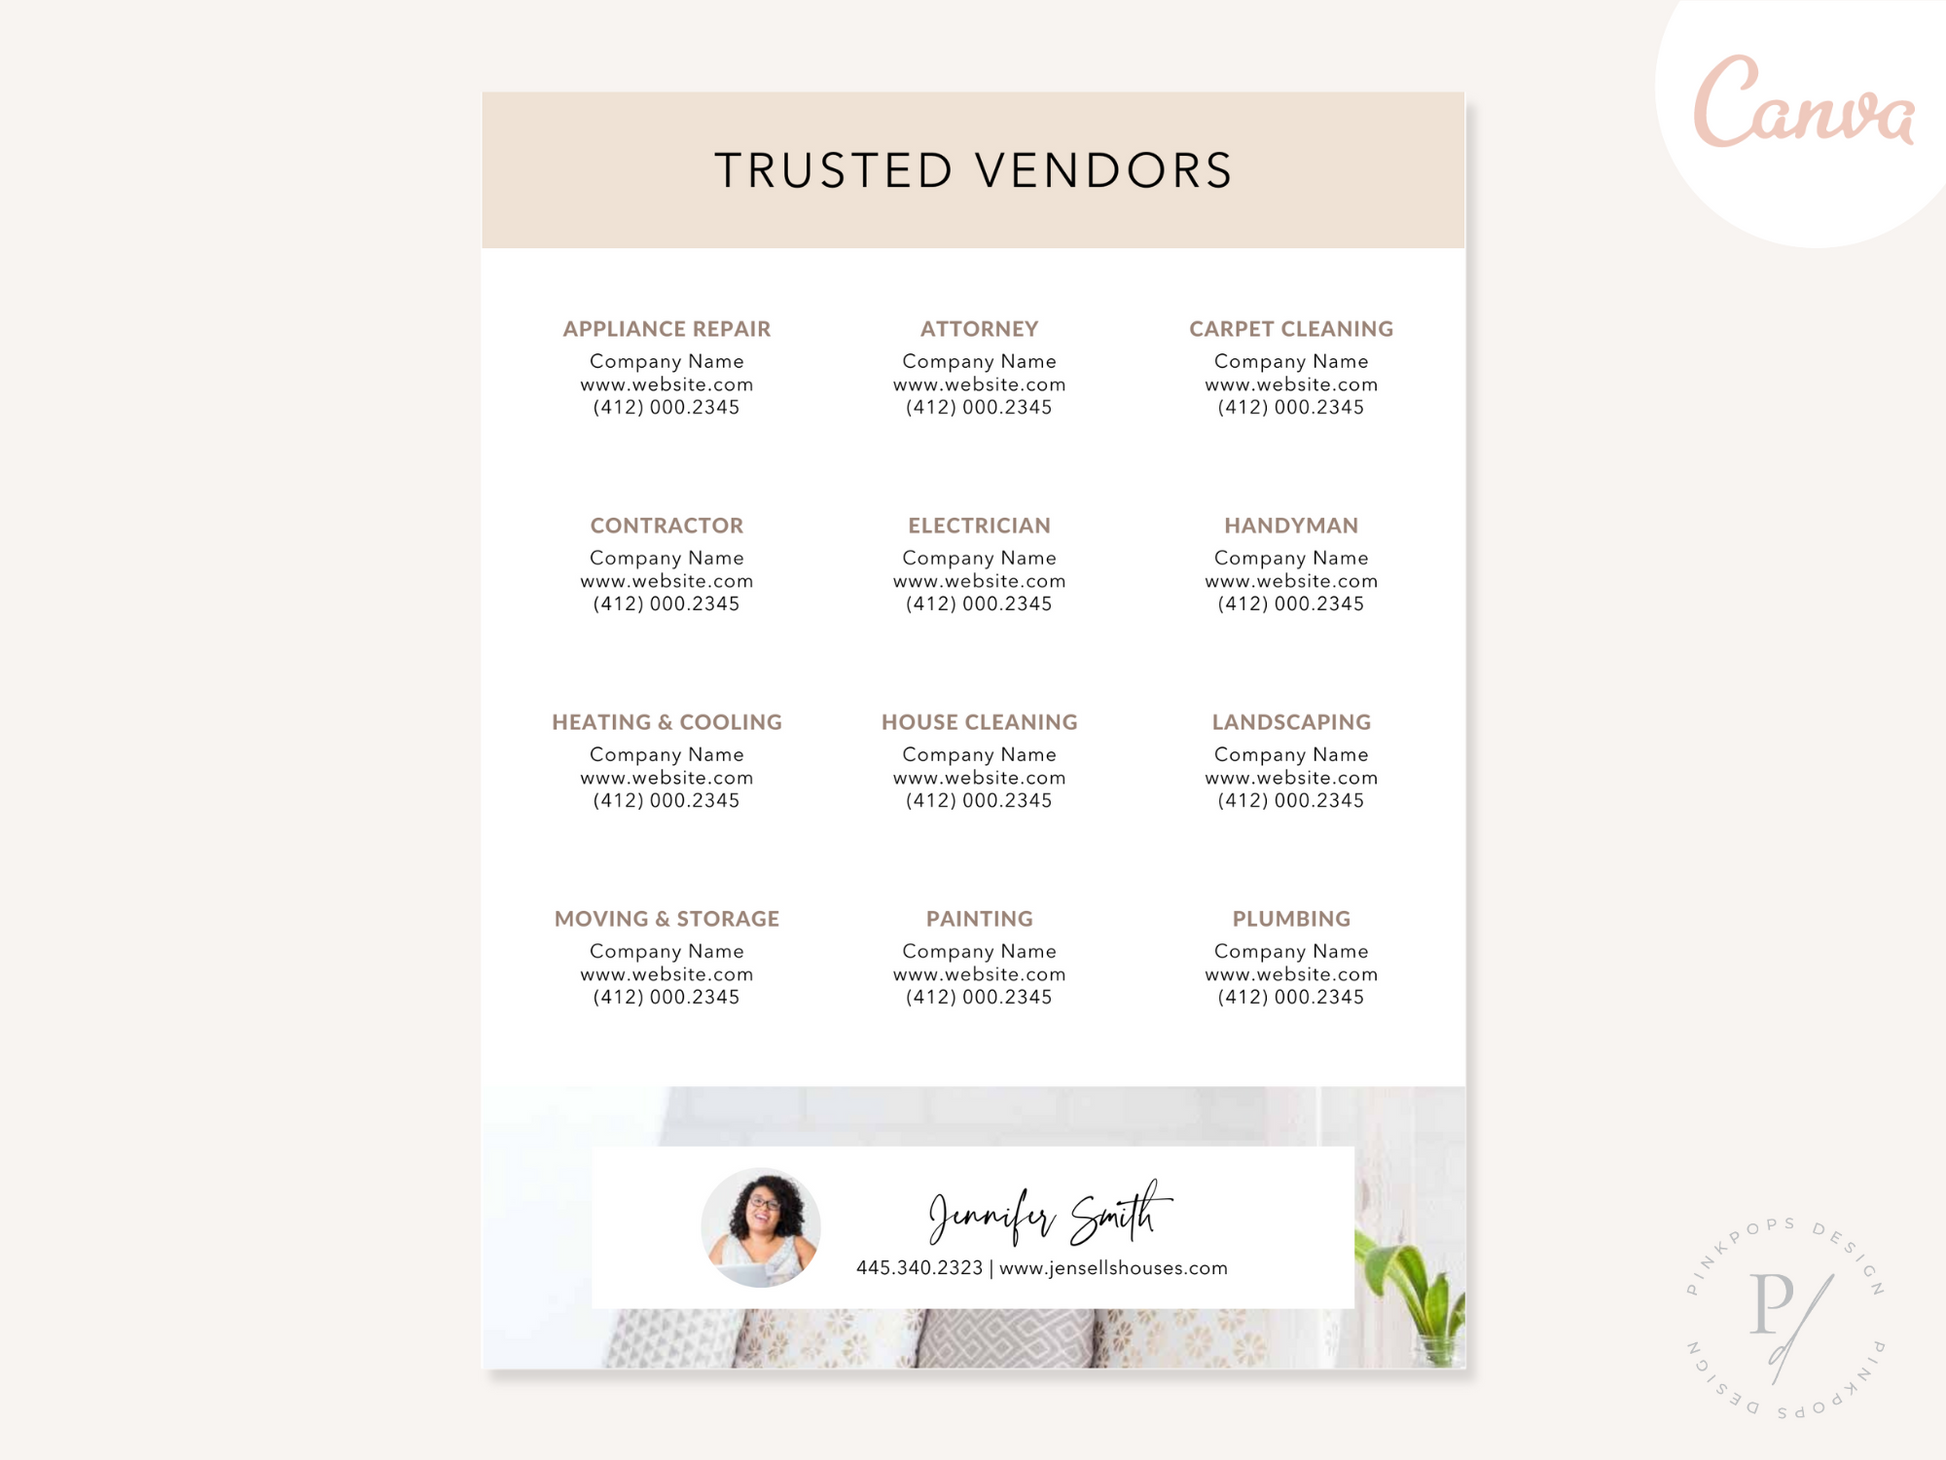 Real Estate Trusted Vendors Flyer - Editable template for connecting clients with reliable service providers in the real estate market.